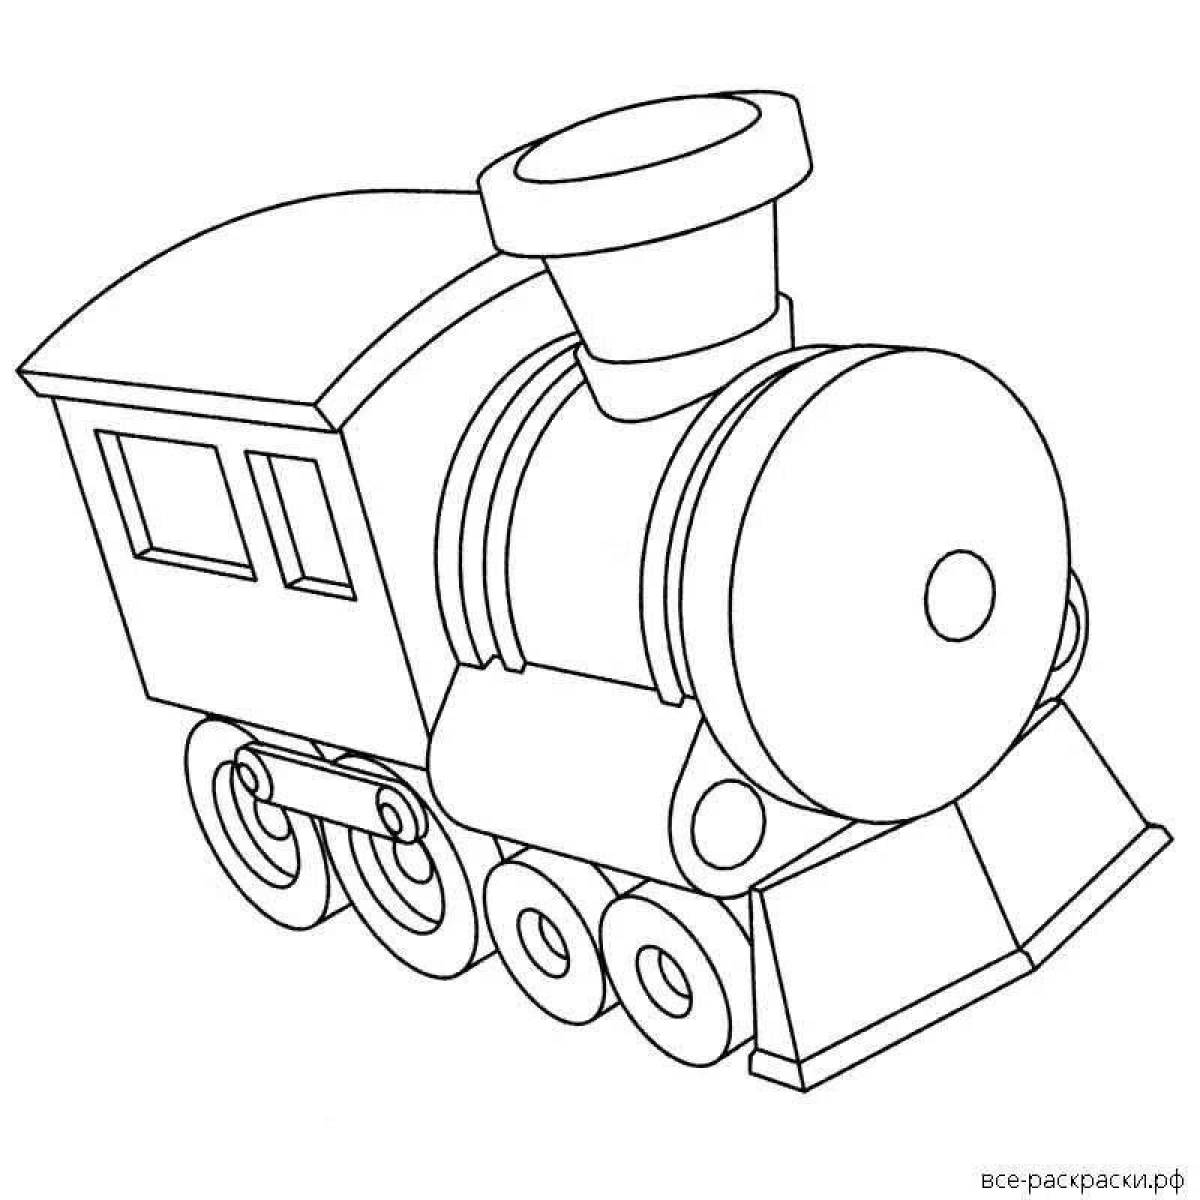 Coloring book funny train for children 3-4 years old